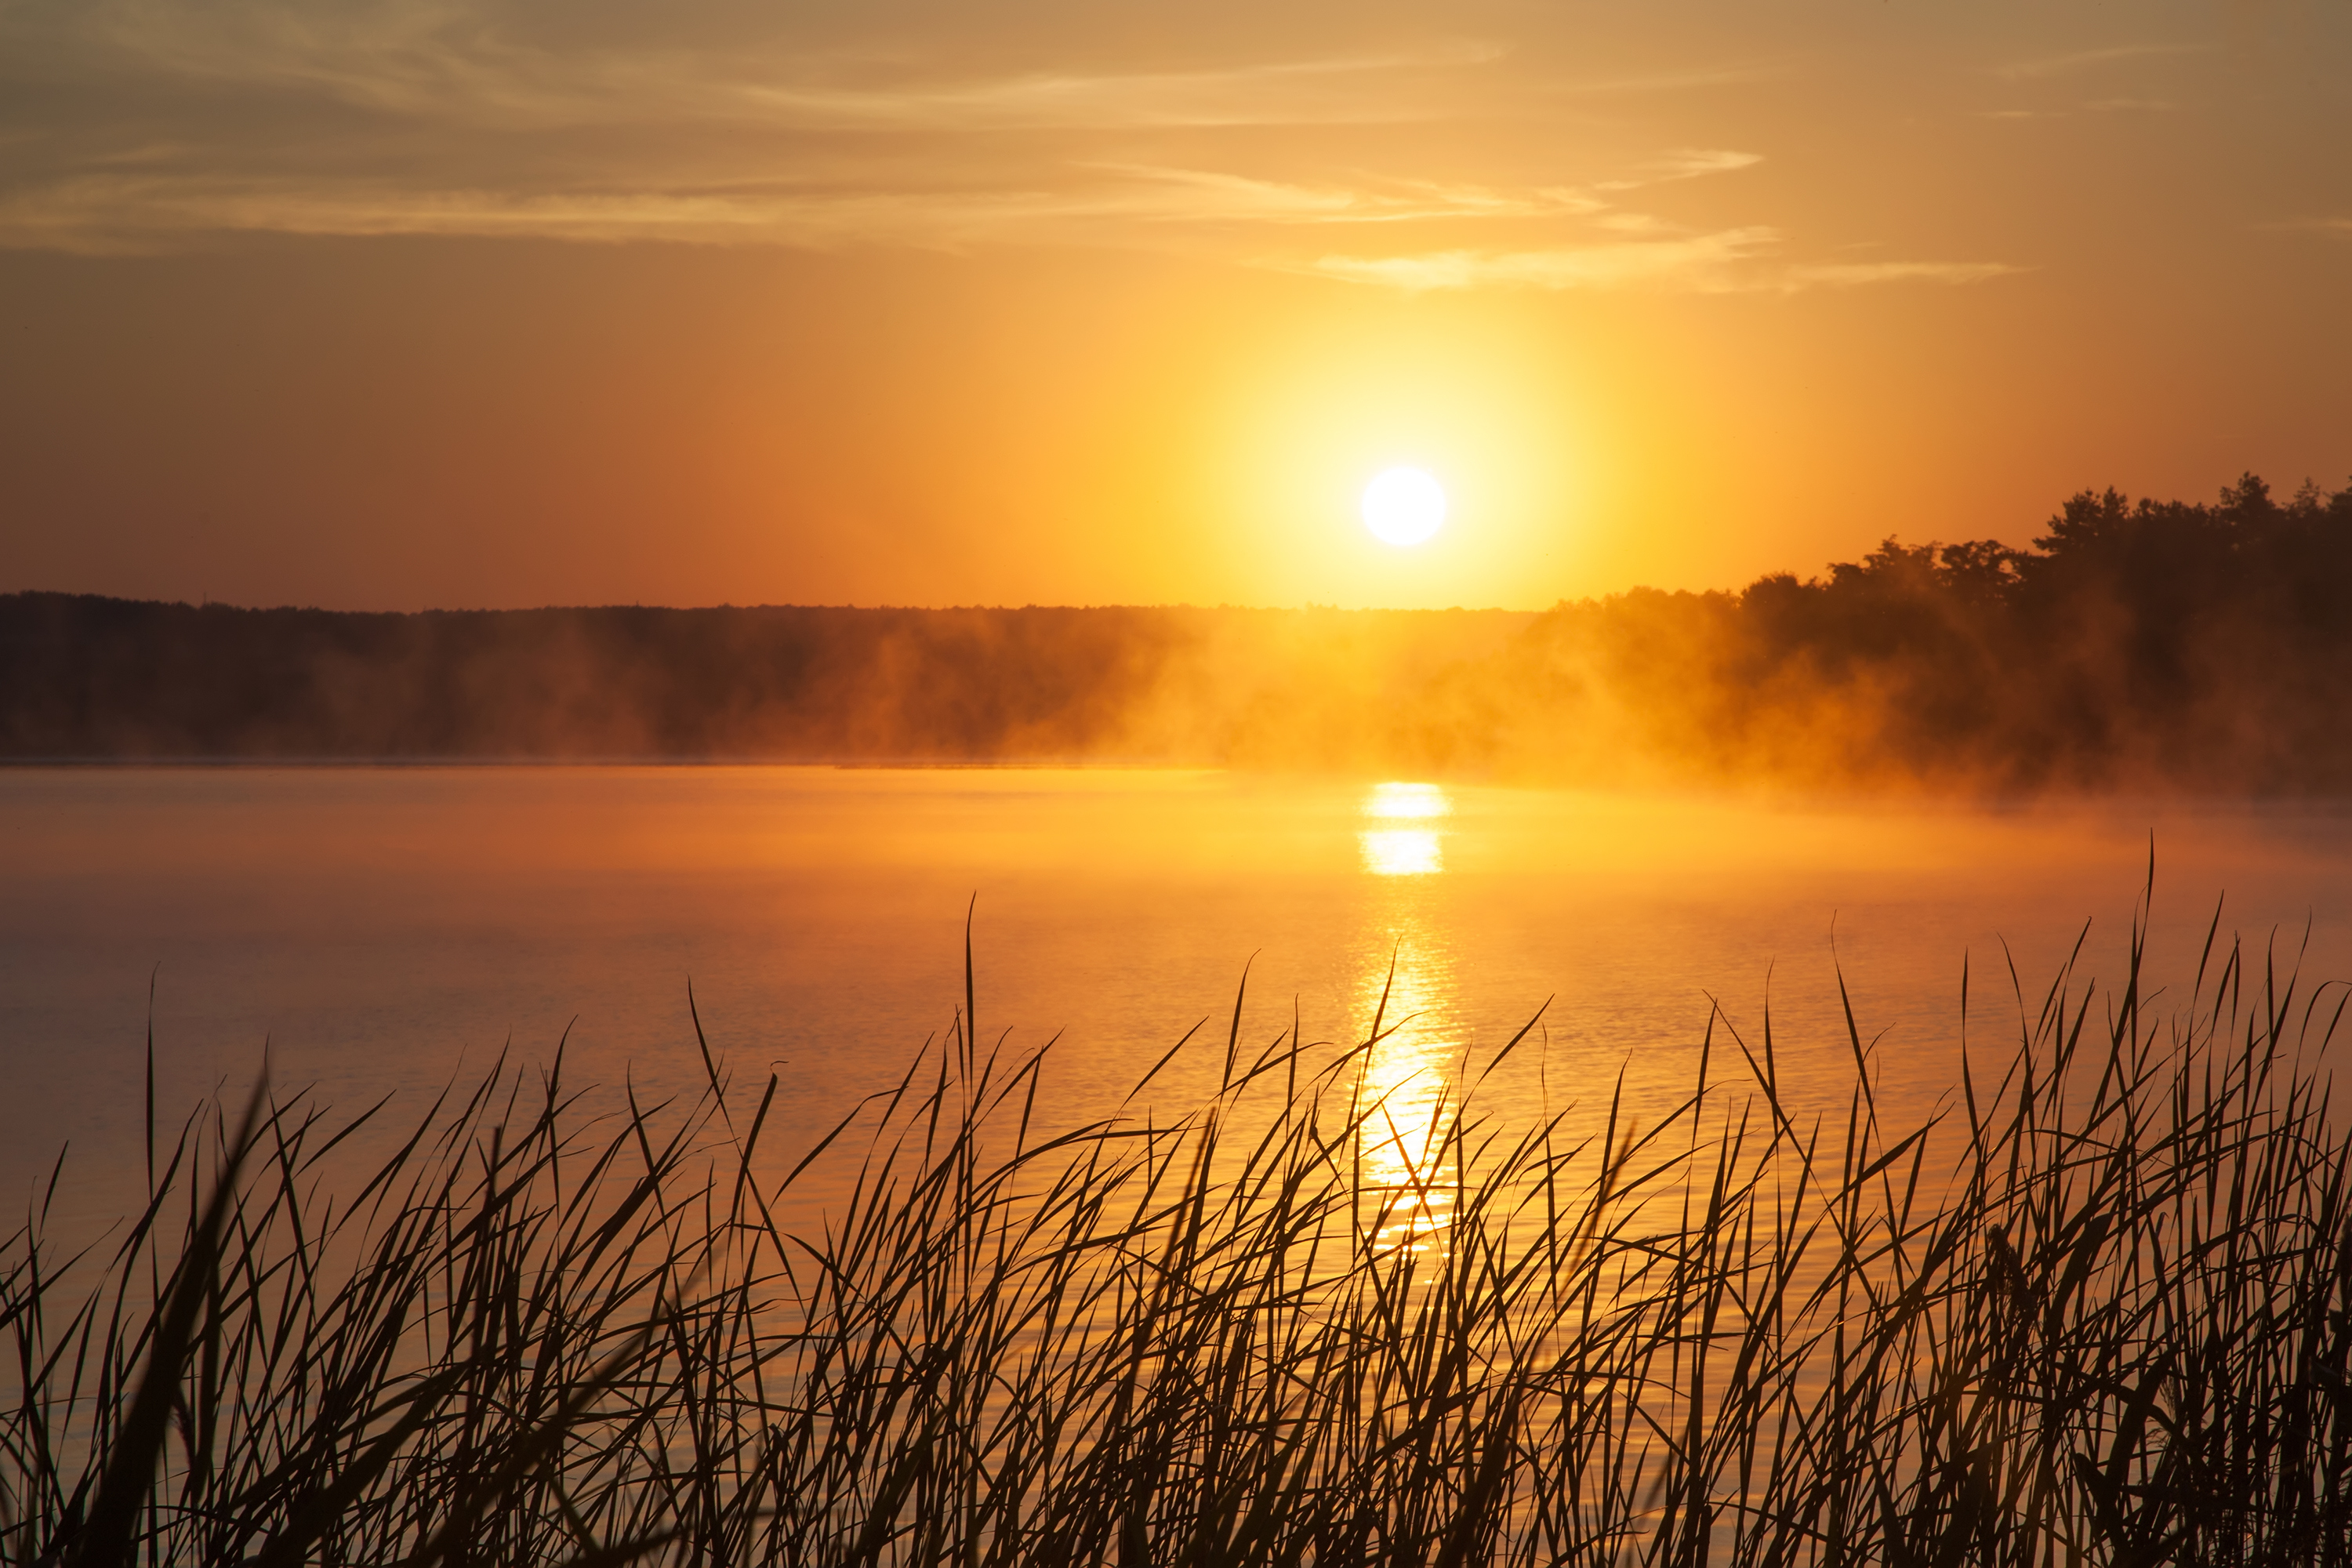 Sunrise on the lake. Early morning landscape. mist on the water, forest silhouettes and the rays of the rising sun.